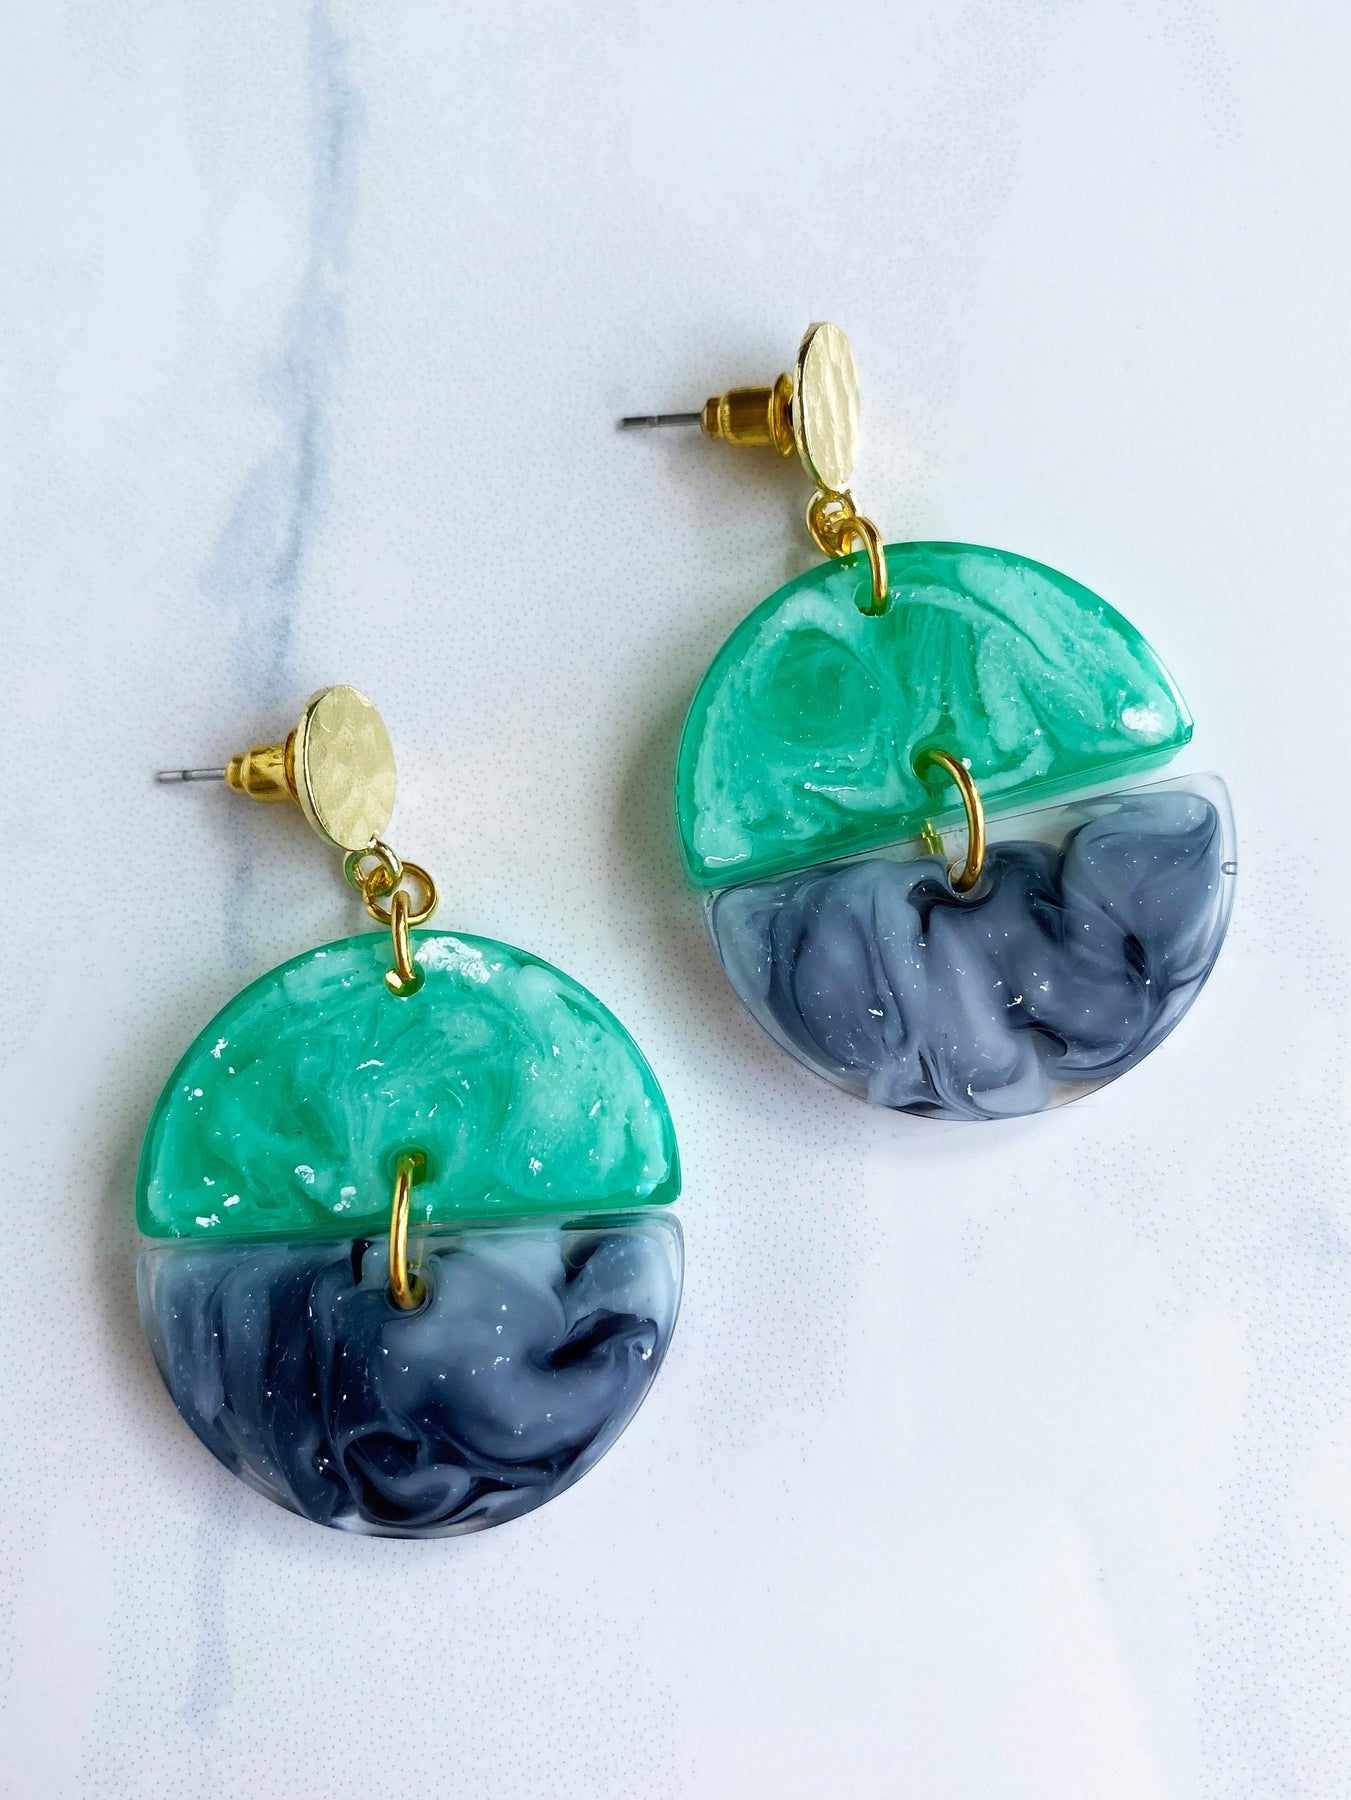 Hand Crafted, Jewelry, Green Gold Resin Earrings